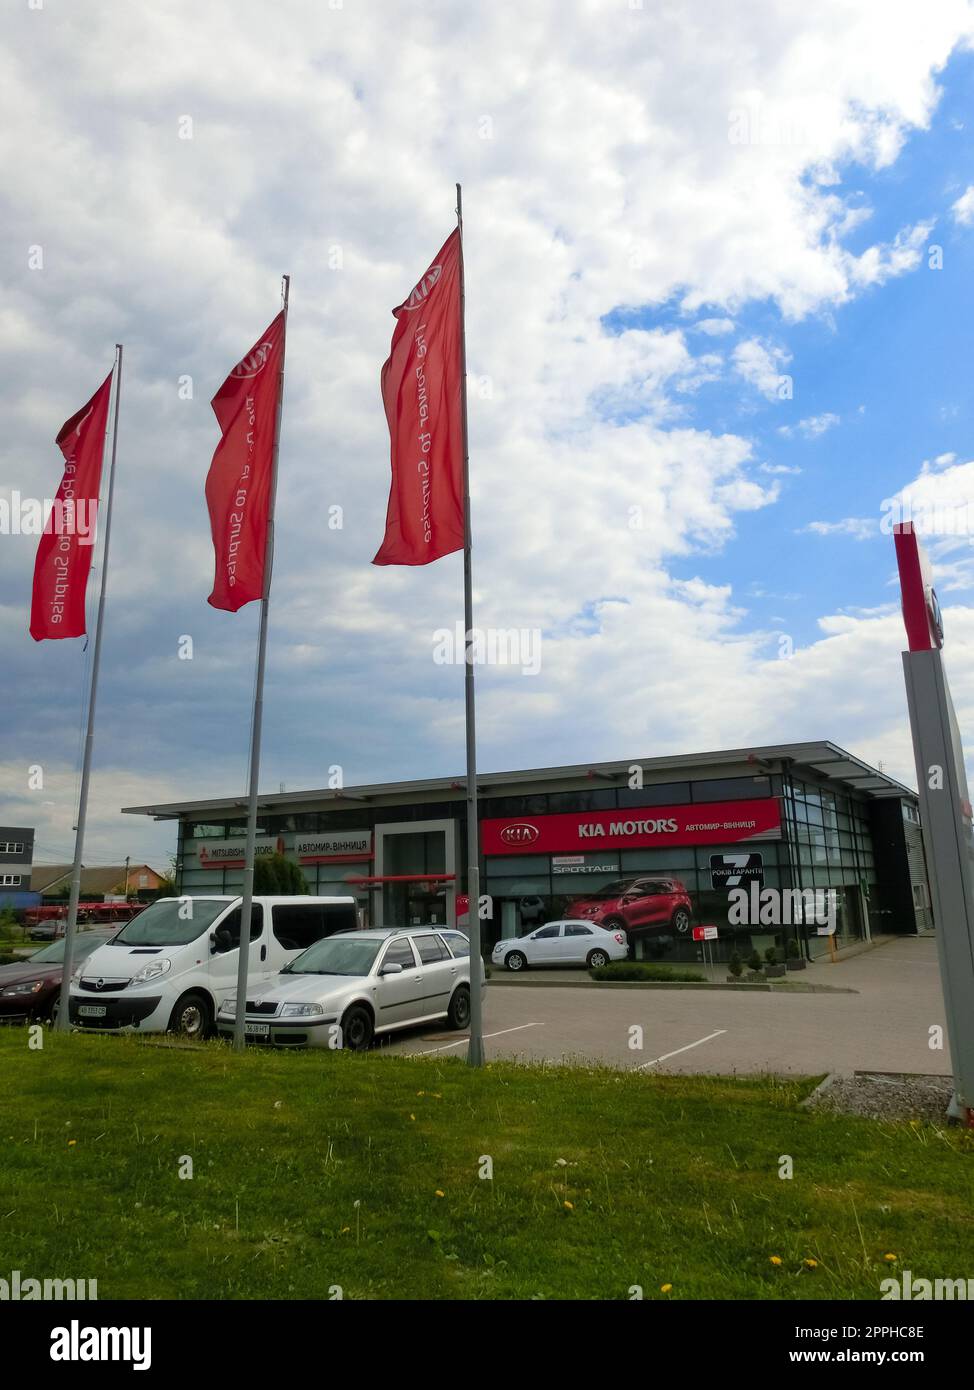 View of the KIA brand dealership store.KIA Motors is a South Korean automotive company producing passenger cars, vans and buses belonging to the Hyundai Motor Group. Stock Photo